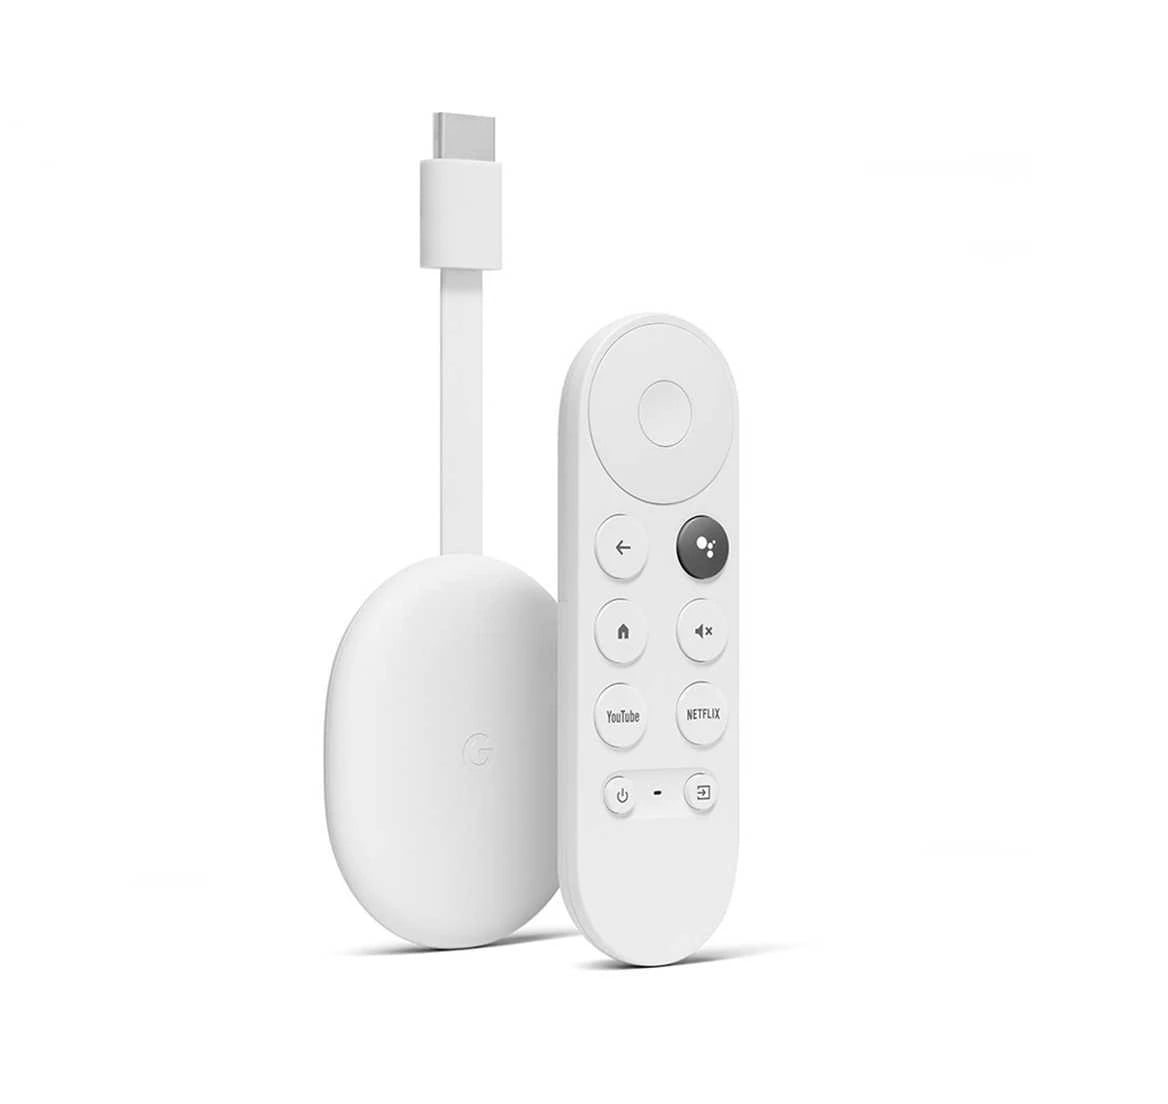 Chromecast Google &Amp;Lt;H1&Amp;Gt;Chromecast With Google Tv - 4K With Remote - Snow (2020 Release)&Amp;Lt;/H1&Amp;Gt; Stream The Entertainment You Love To Your Tv In Up To 4K Resolution With The Google Chromecast With Google Tv. This Media Streamer Works With Almost Any Smart Tv With An Hdmi Port And Wi-Fi. Google Tv And Android Apps Give You Access To Movies, Tv Shows, Music, And Much More. Cast From Your Compatible Device, And Use The Voice Remote For Hands-Free Search And Suggestions. Google Chromecast Chromecast With Google Tv - 4K With Remote - Snow (2020 Release)